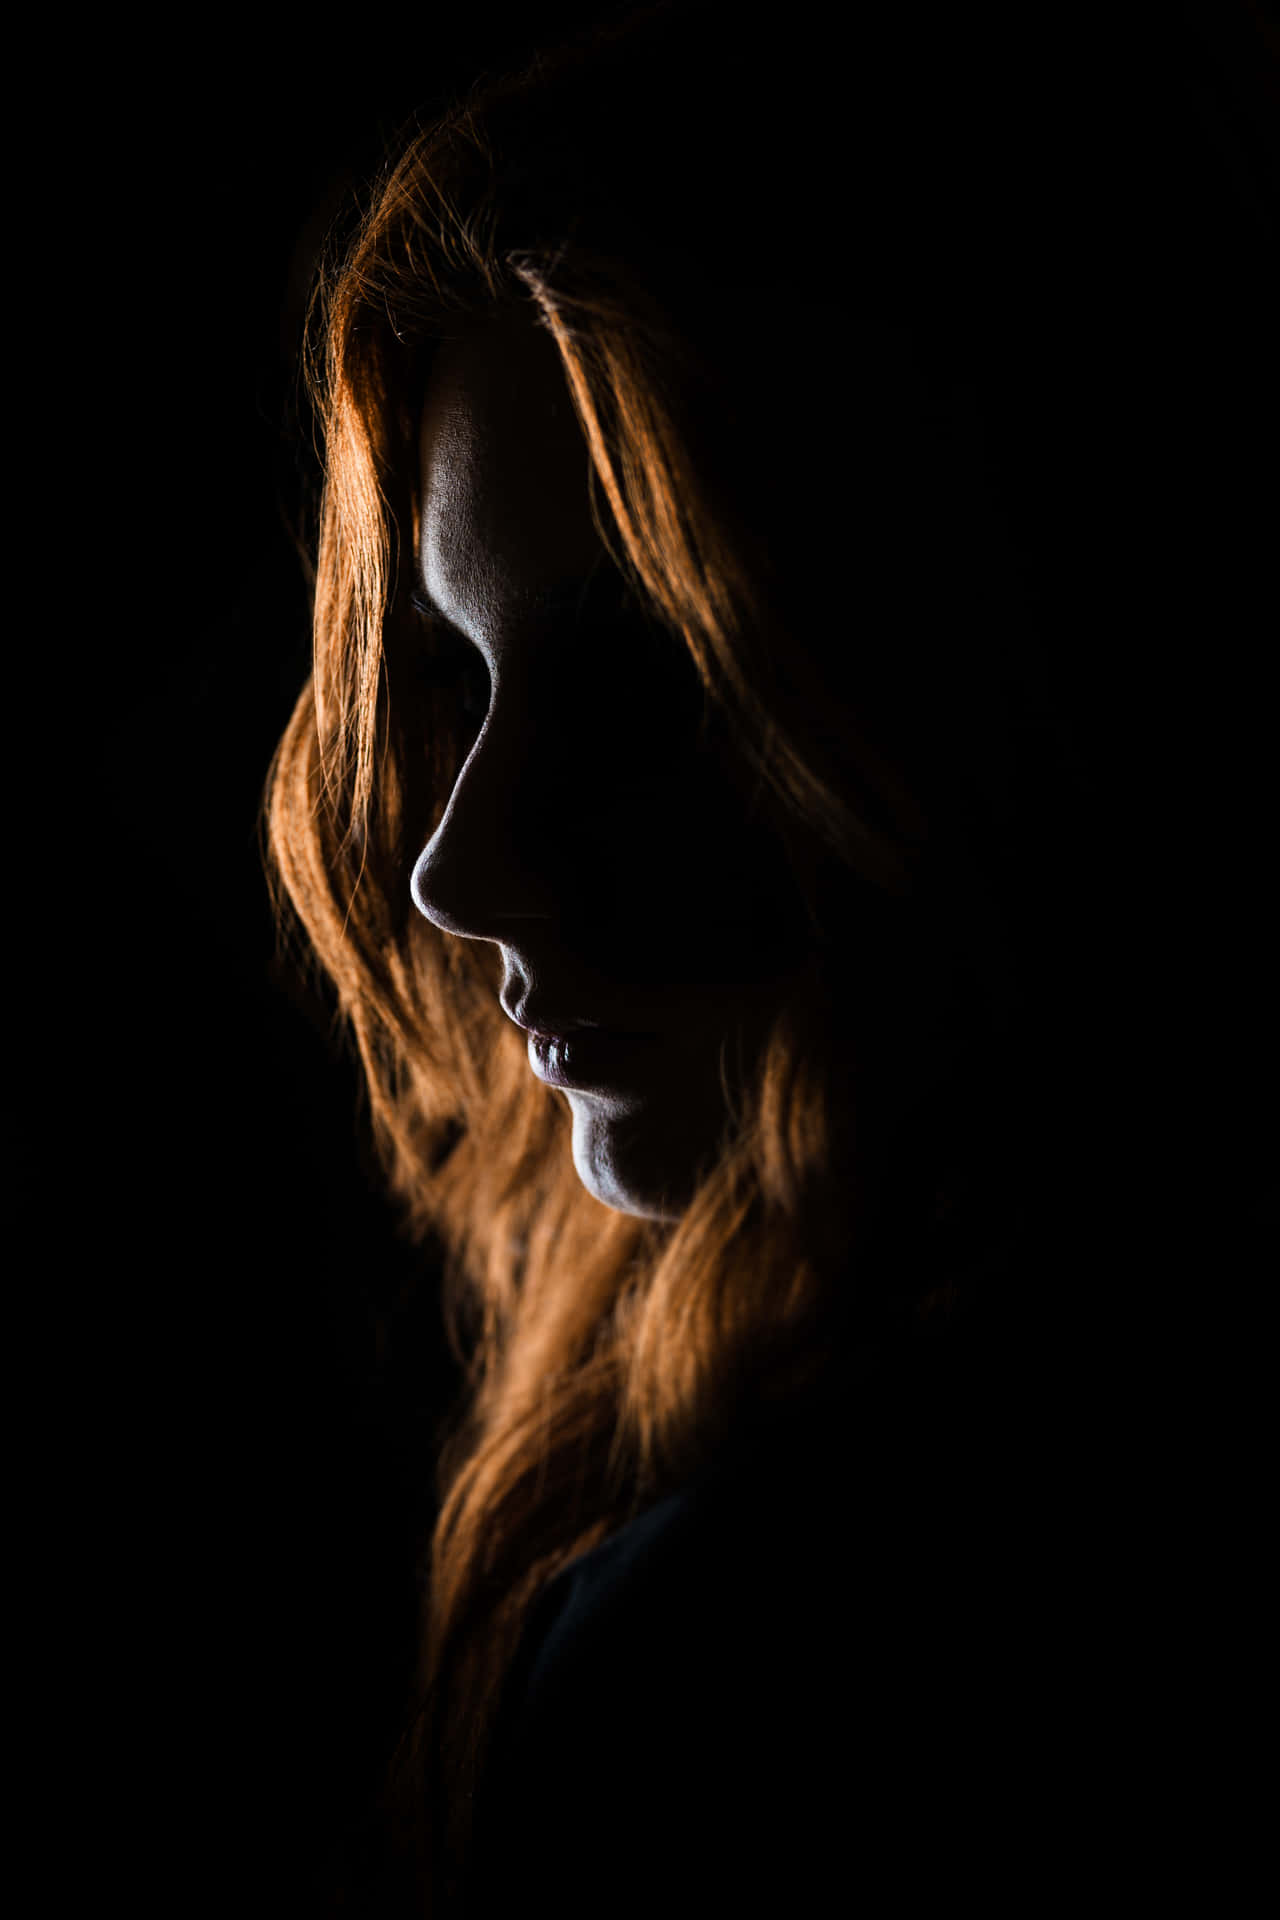 Serene Silhouette of a Woman's Face Wallpaper